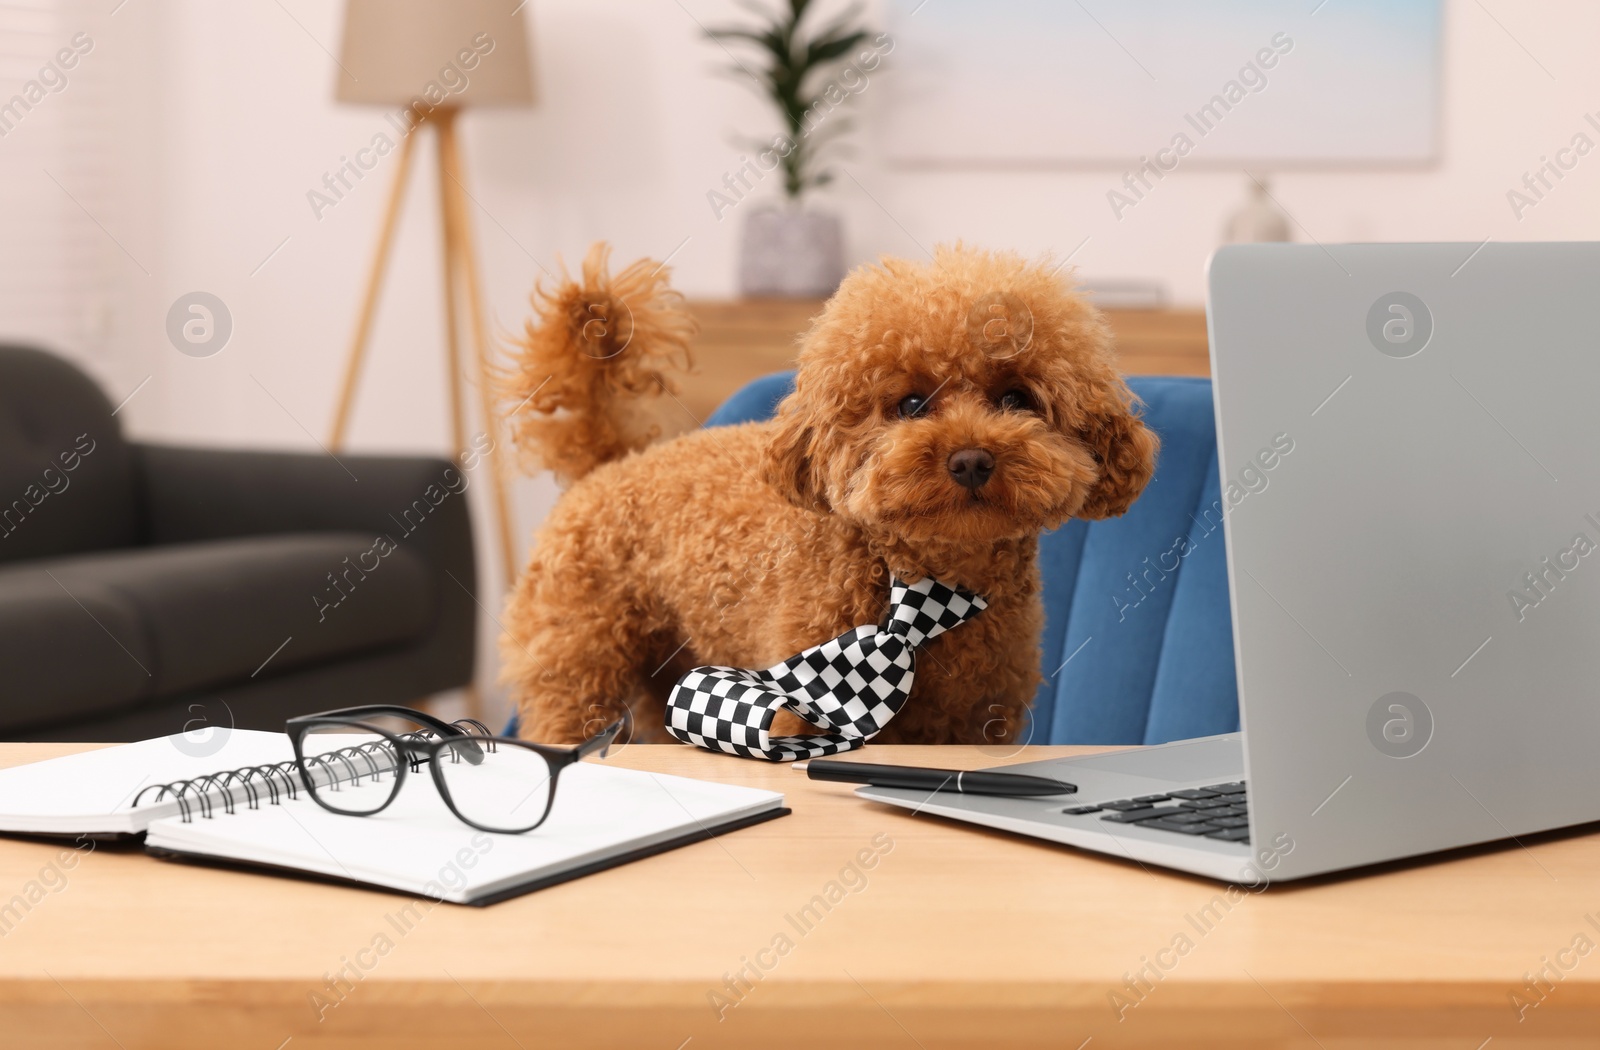 Photo of Cute Maltipoo dog wearing checkered tie at desk with laptop and stationery in room. Lovely pet